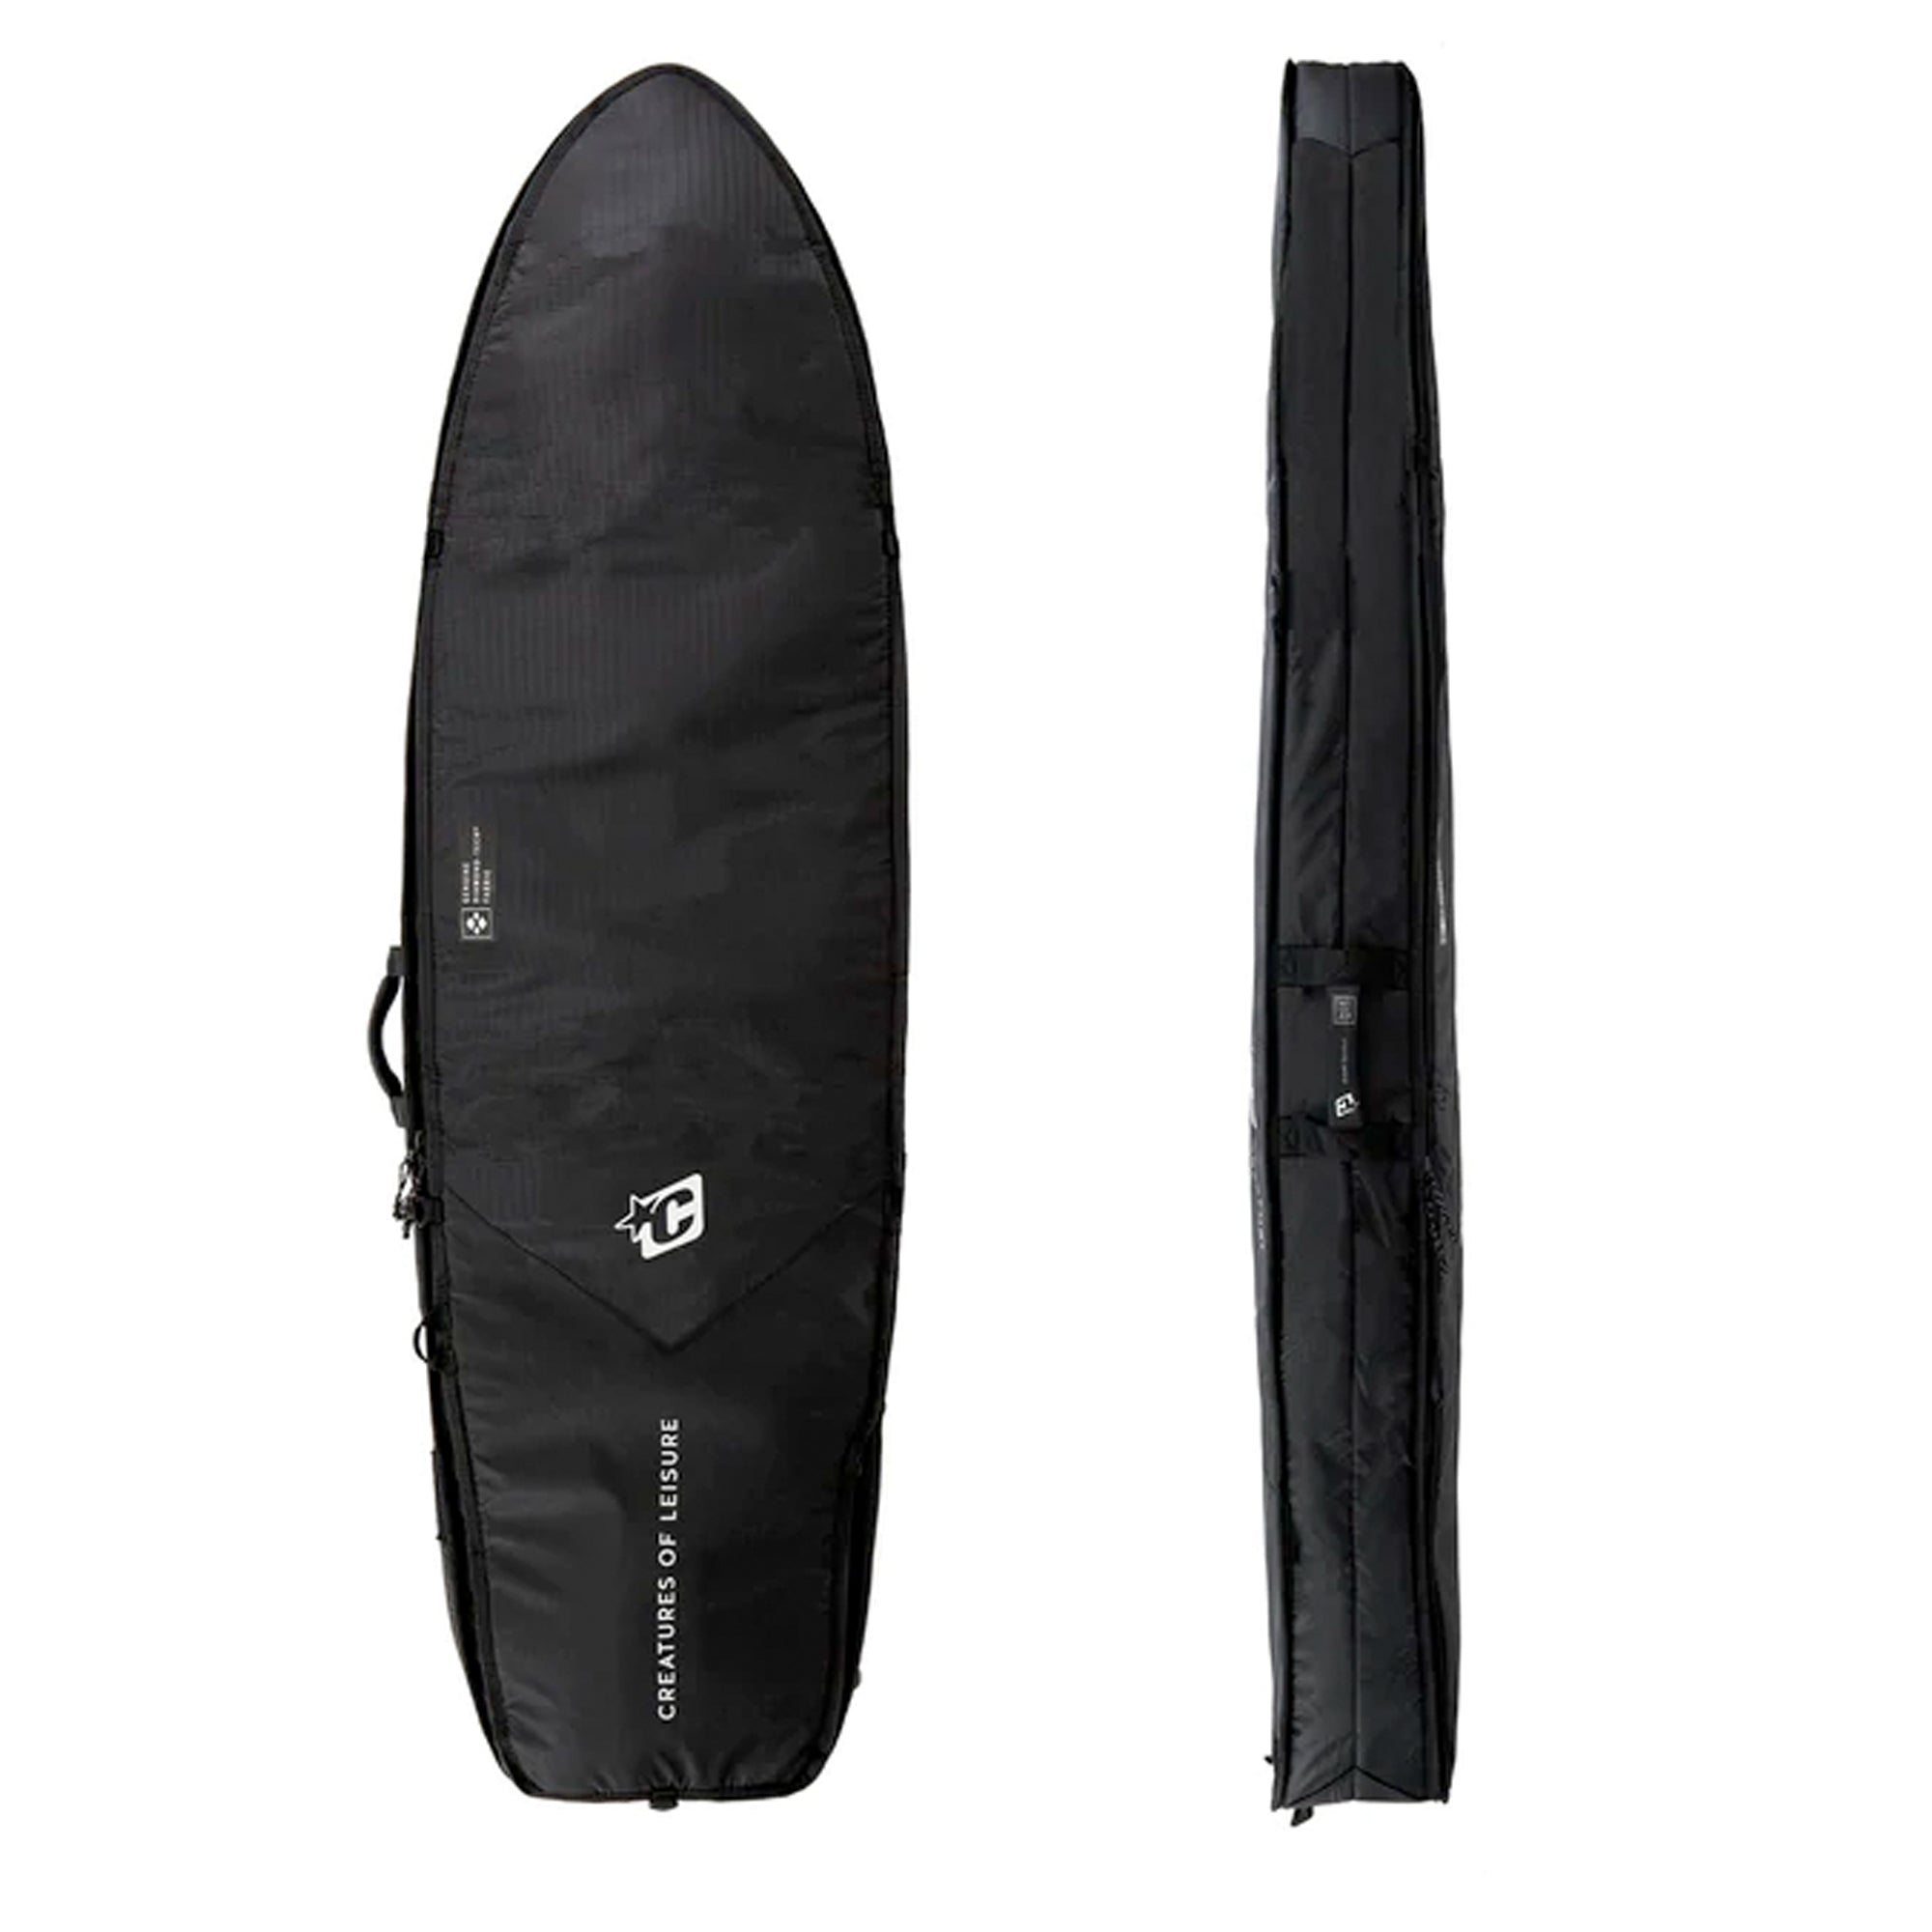 Creatures of Leisure 2021 Fish Double DT2.0 Surfboard Bag